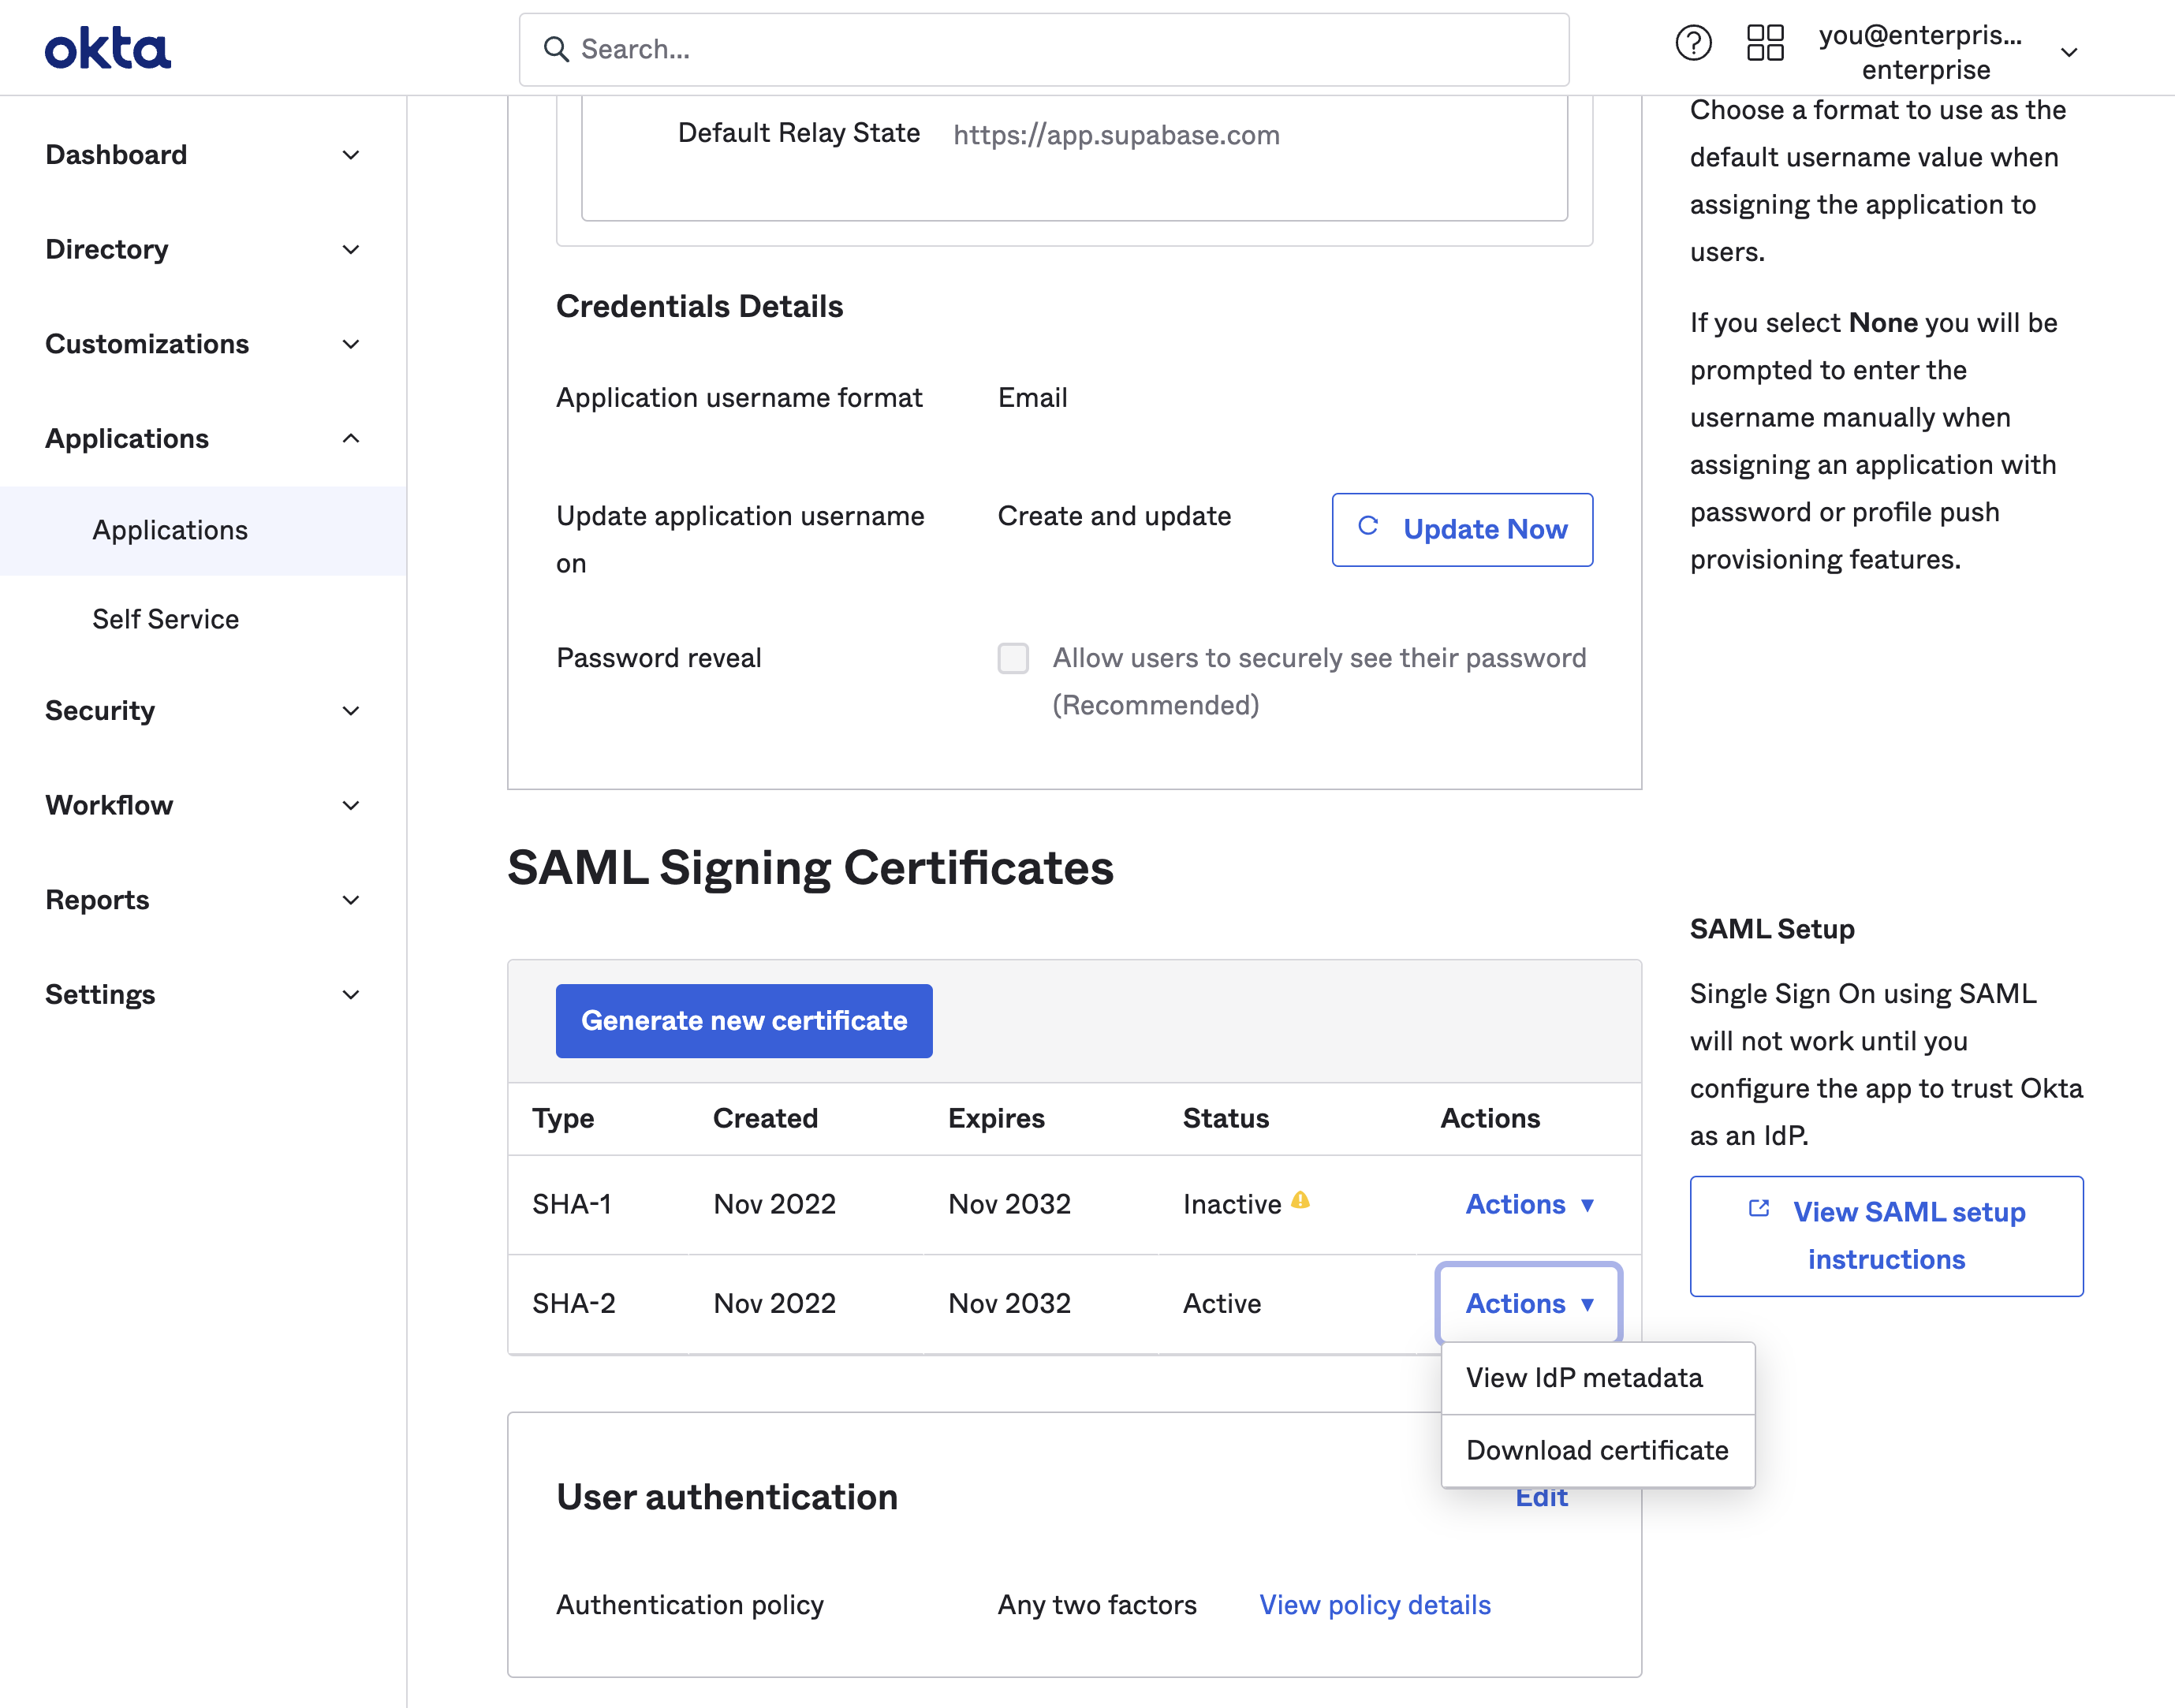 Okta dashboard: SAML Signing Certificates, Actions button highlighted